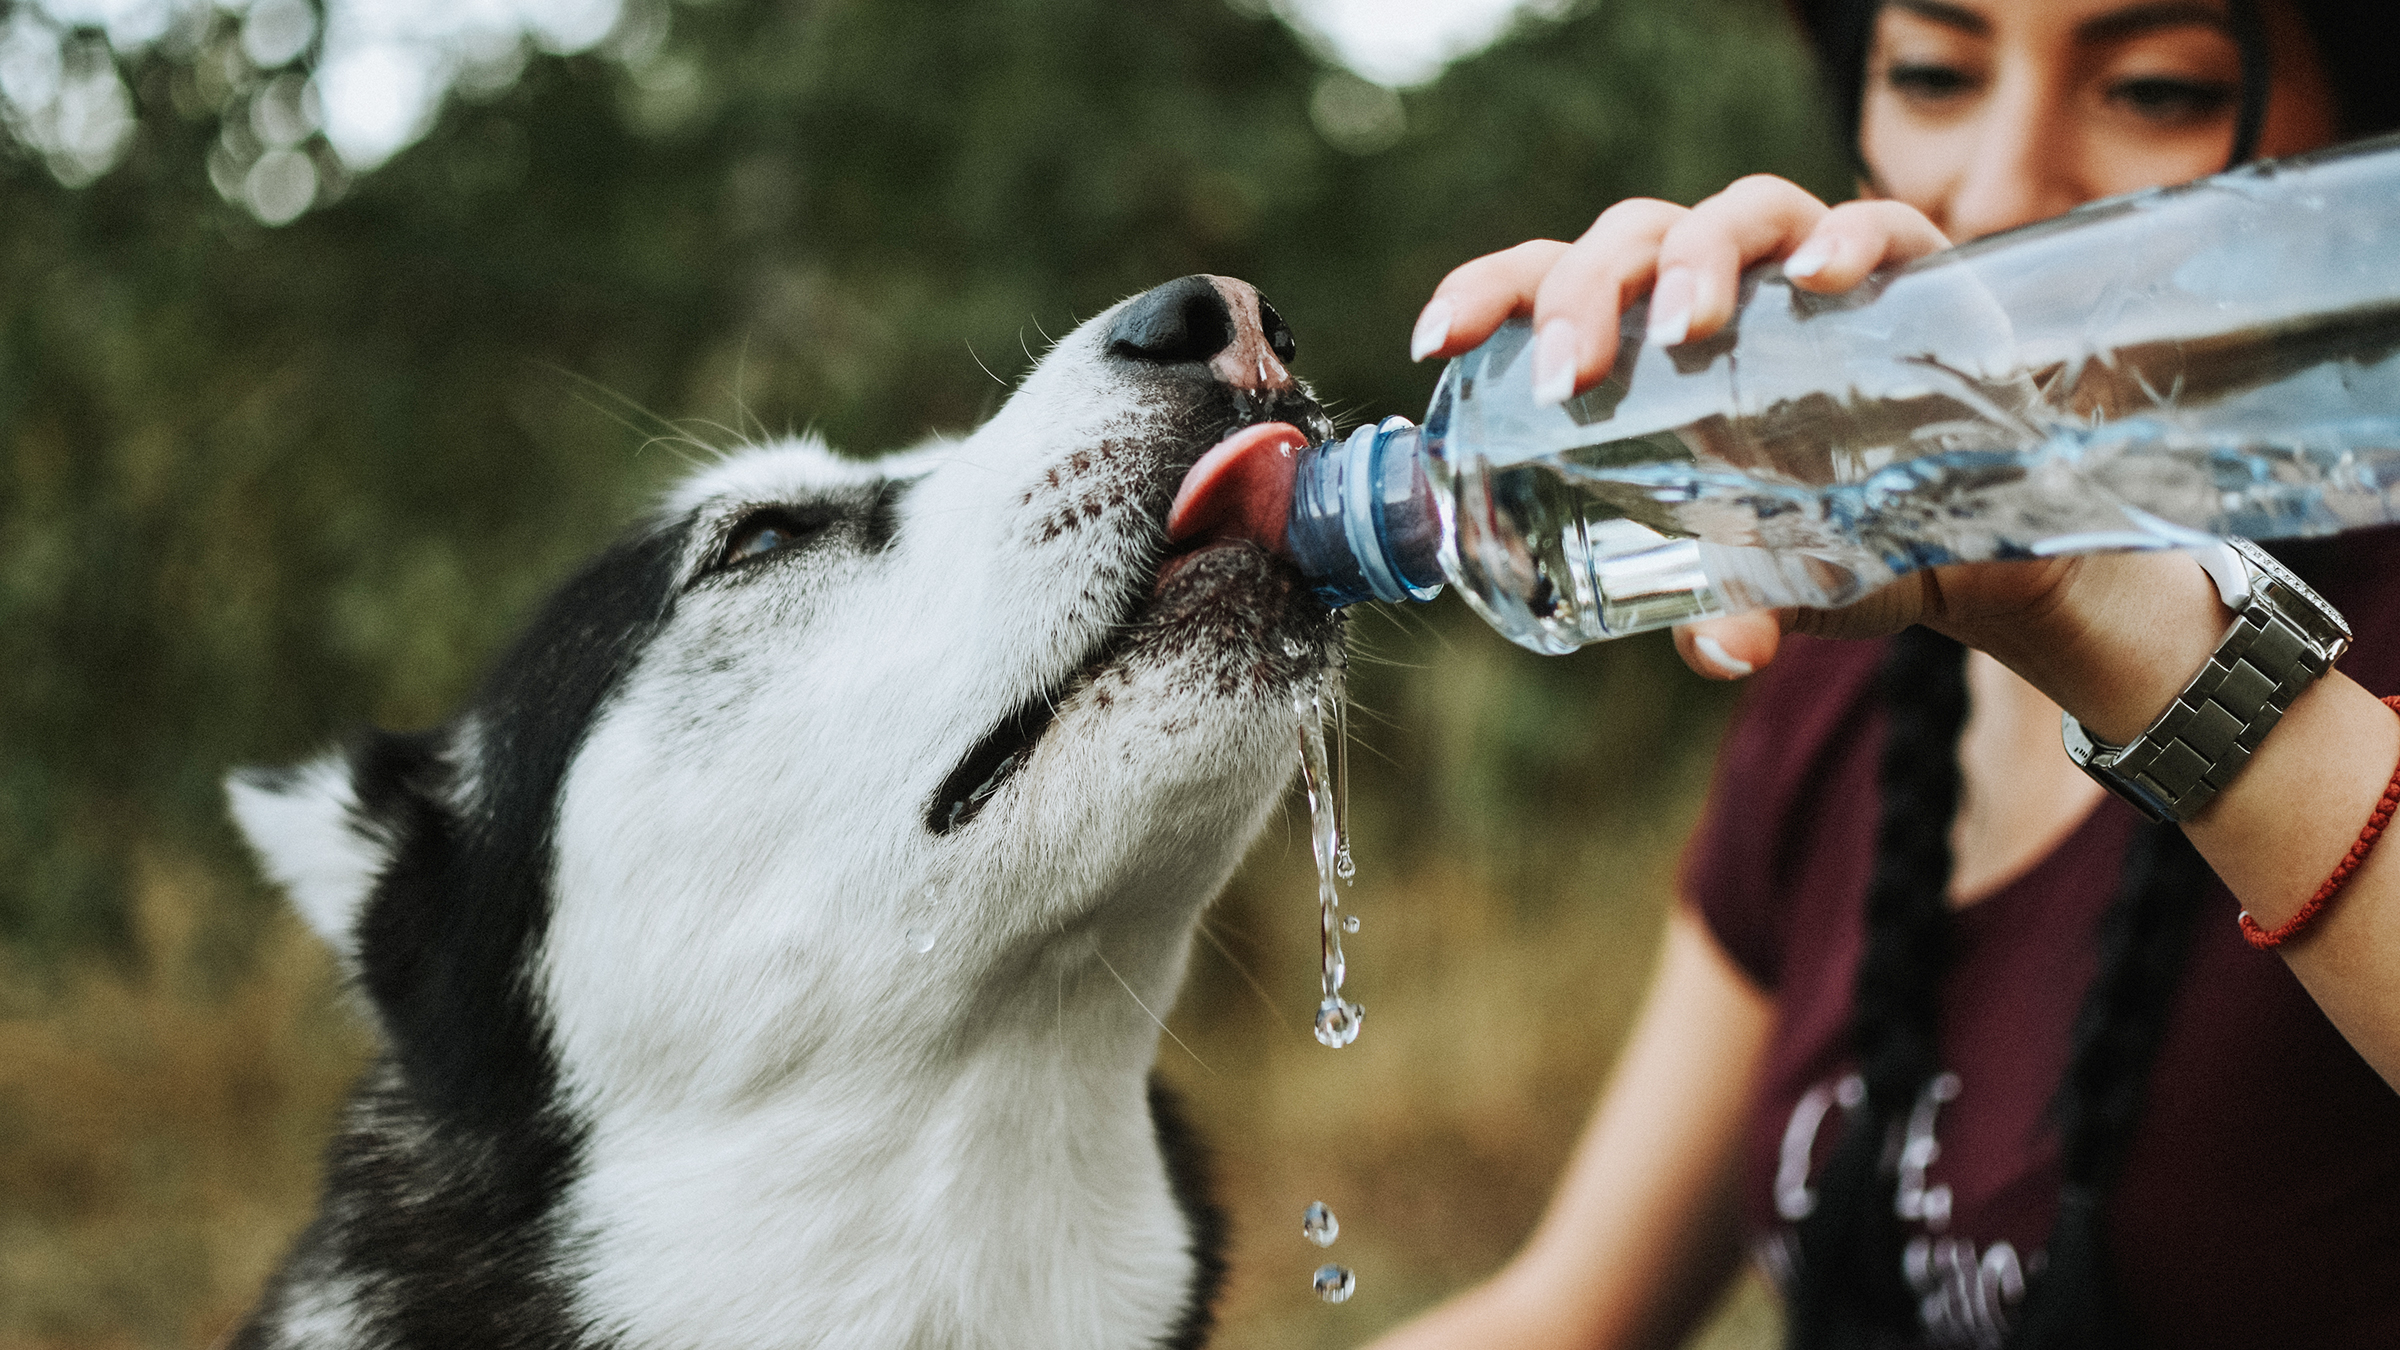 are water bottles safe for dogs to chew